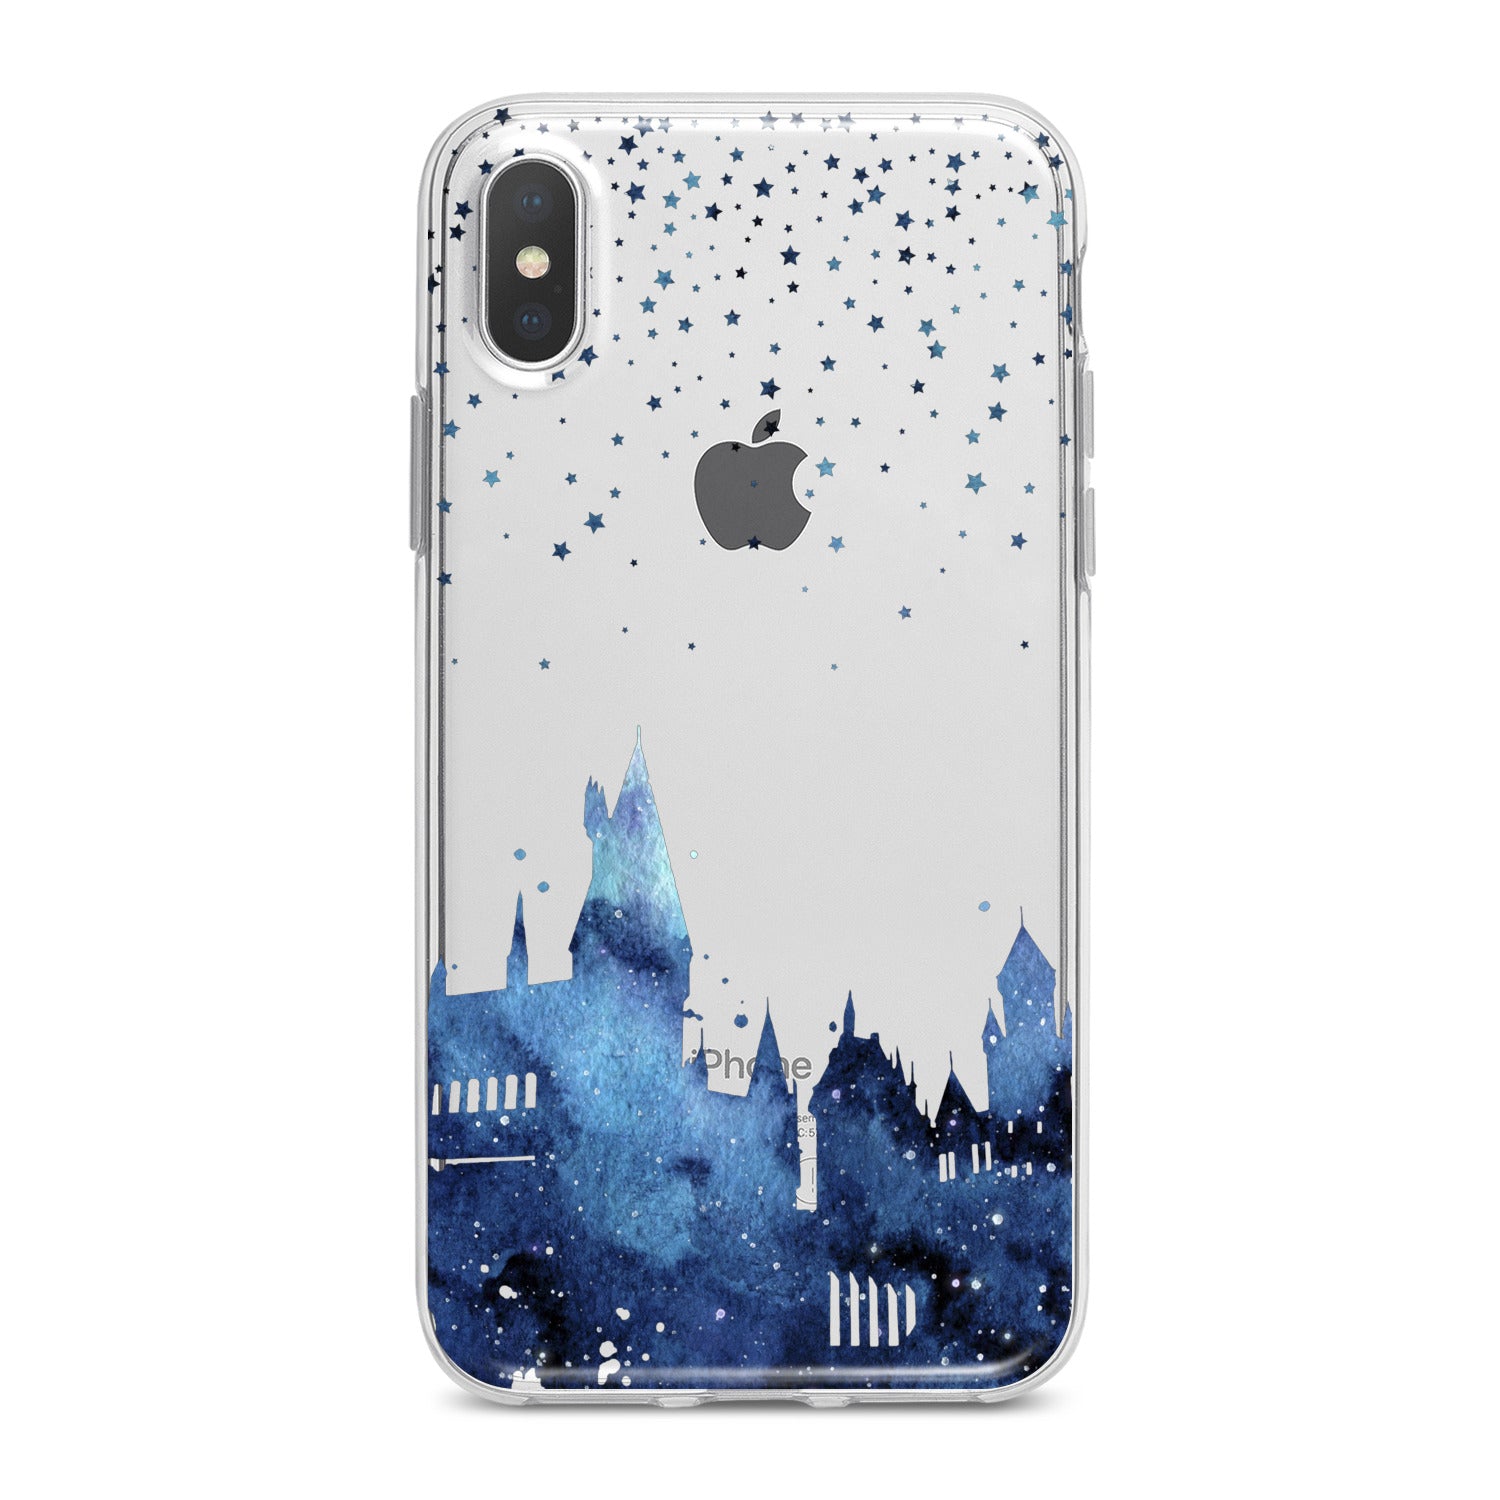 Lex Altern Blue Castle Phone Case for your iPhone & Android phone.